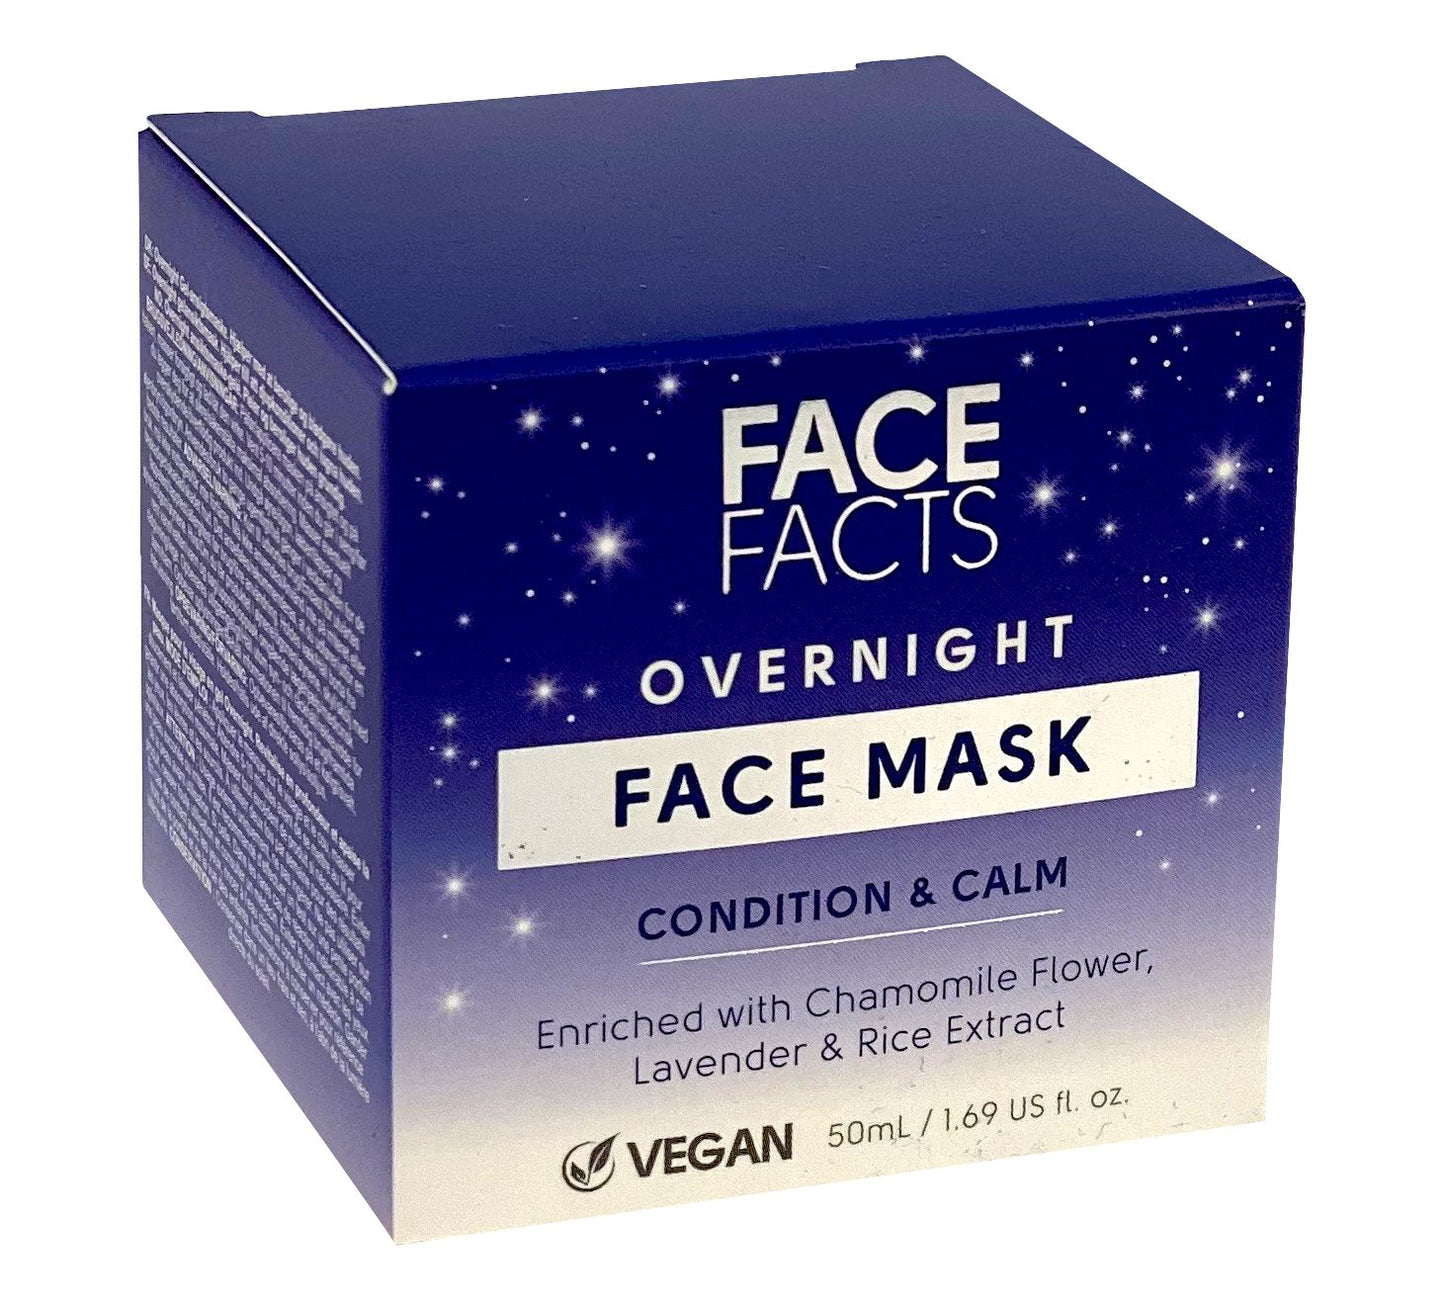 Face Facts Overnight Face Mask Condition & Calm